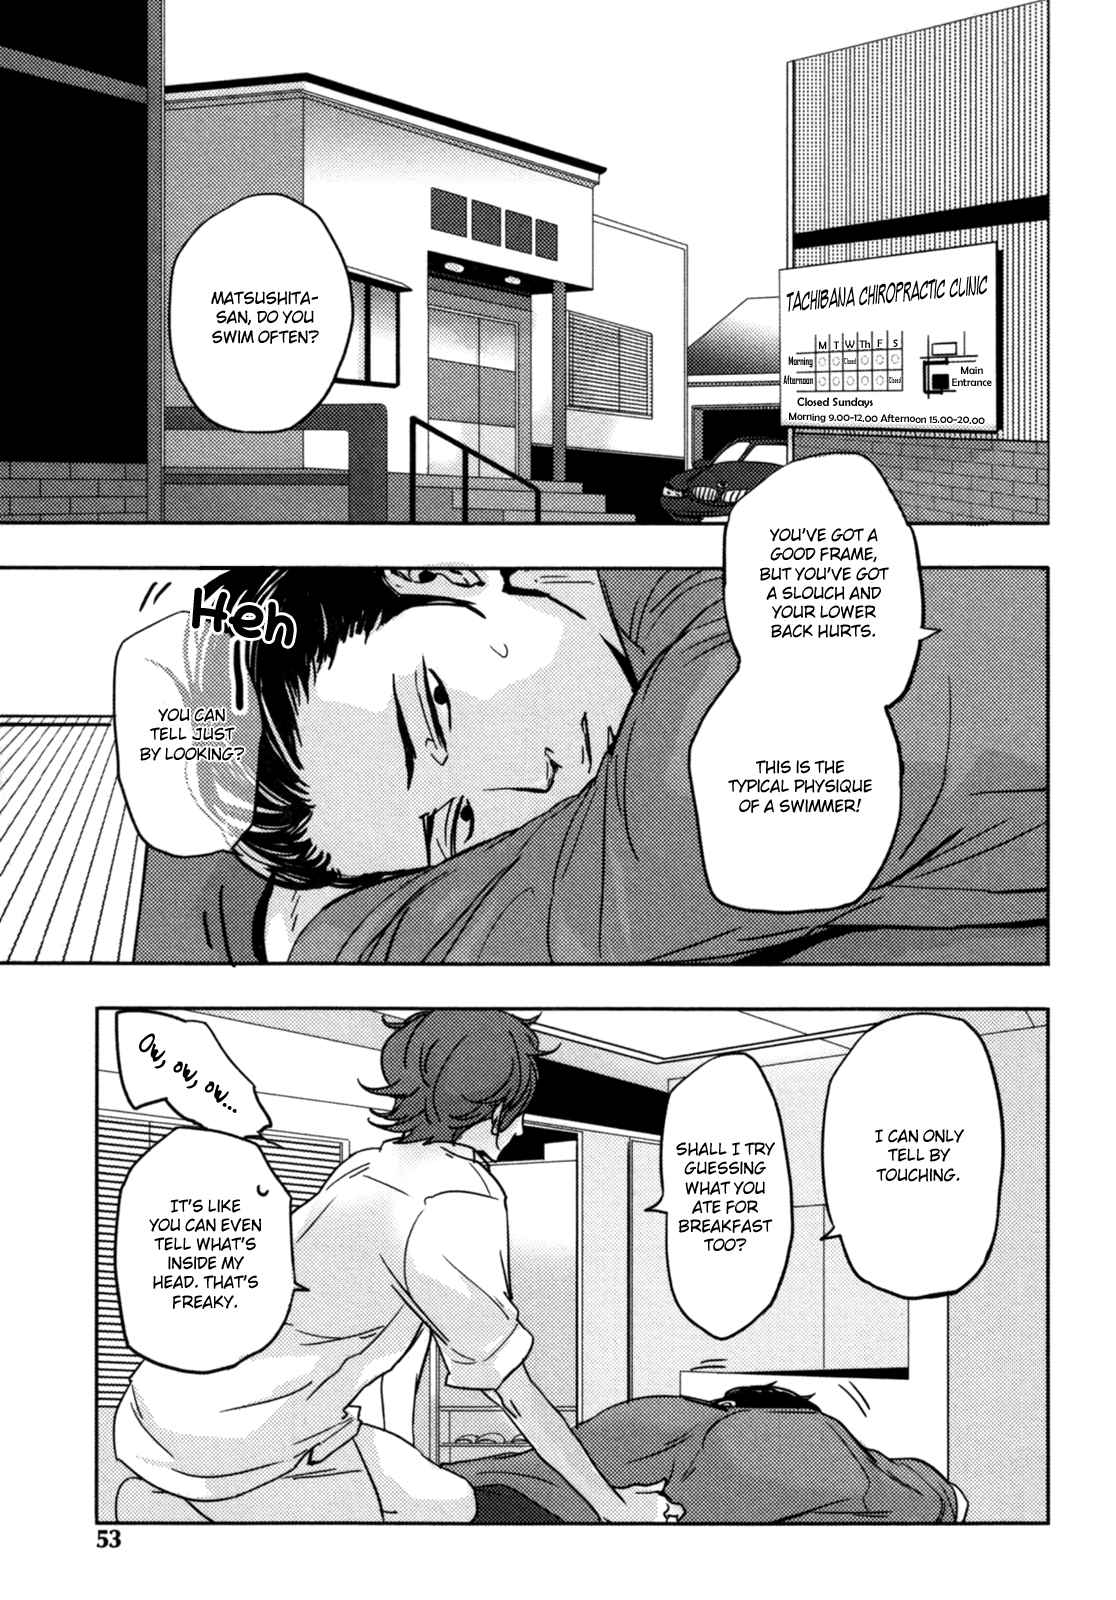 Yamome no Tamago Vol. 1 Ch. 3 My Chiropractor Act 1